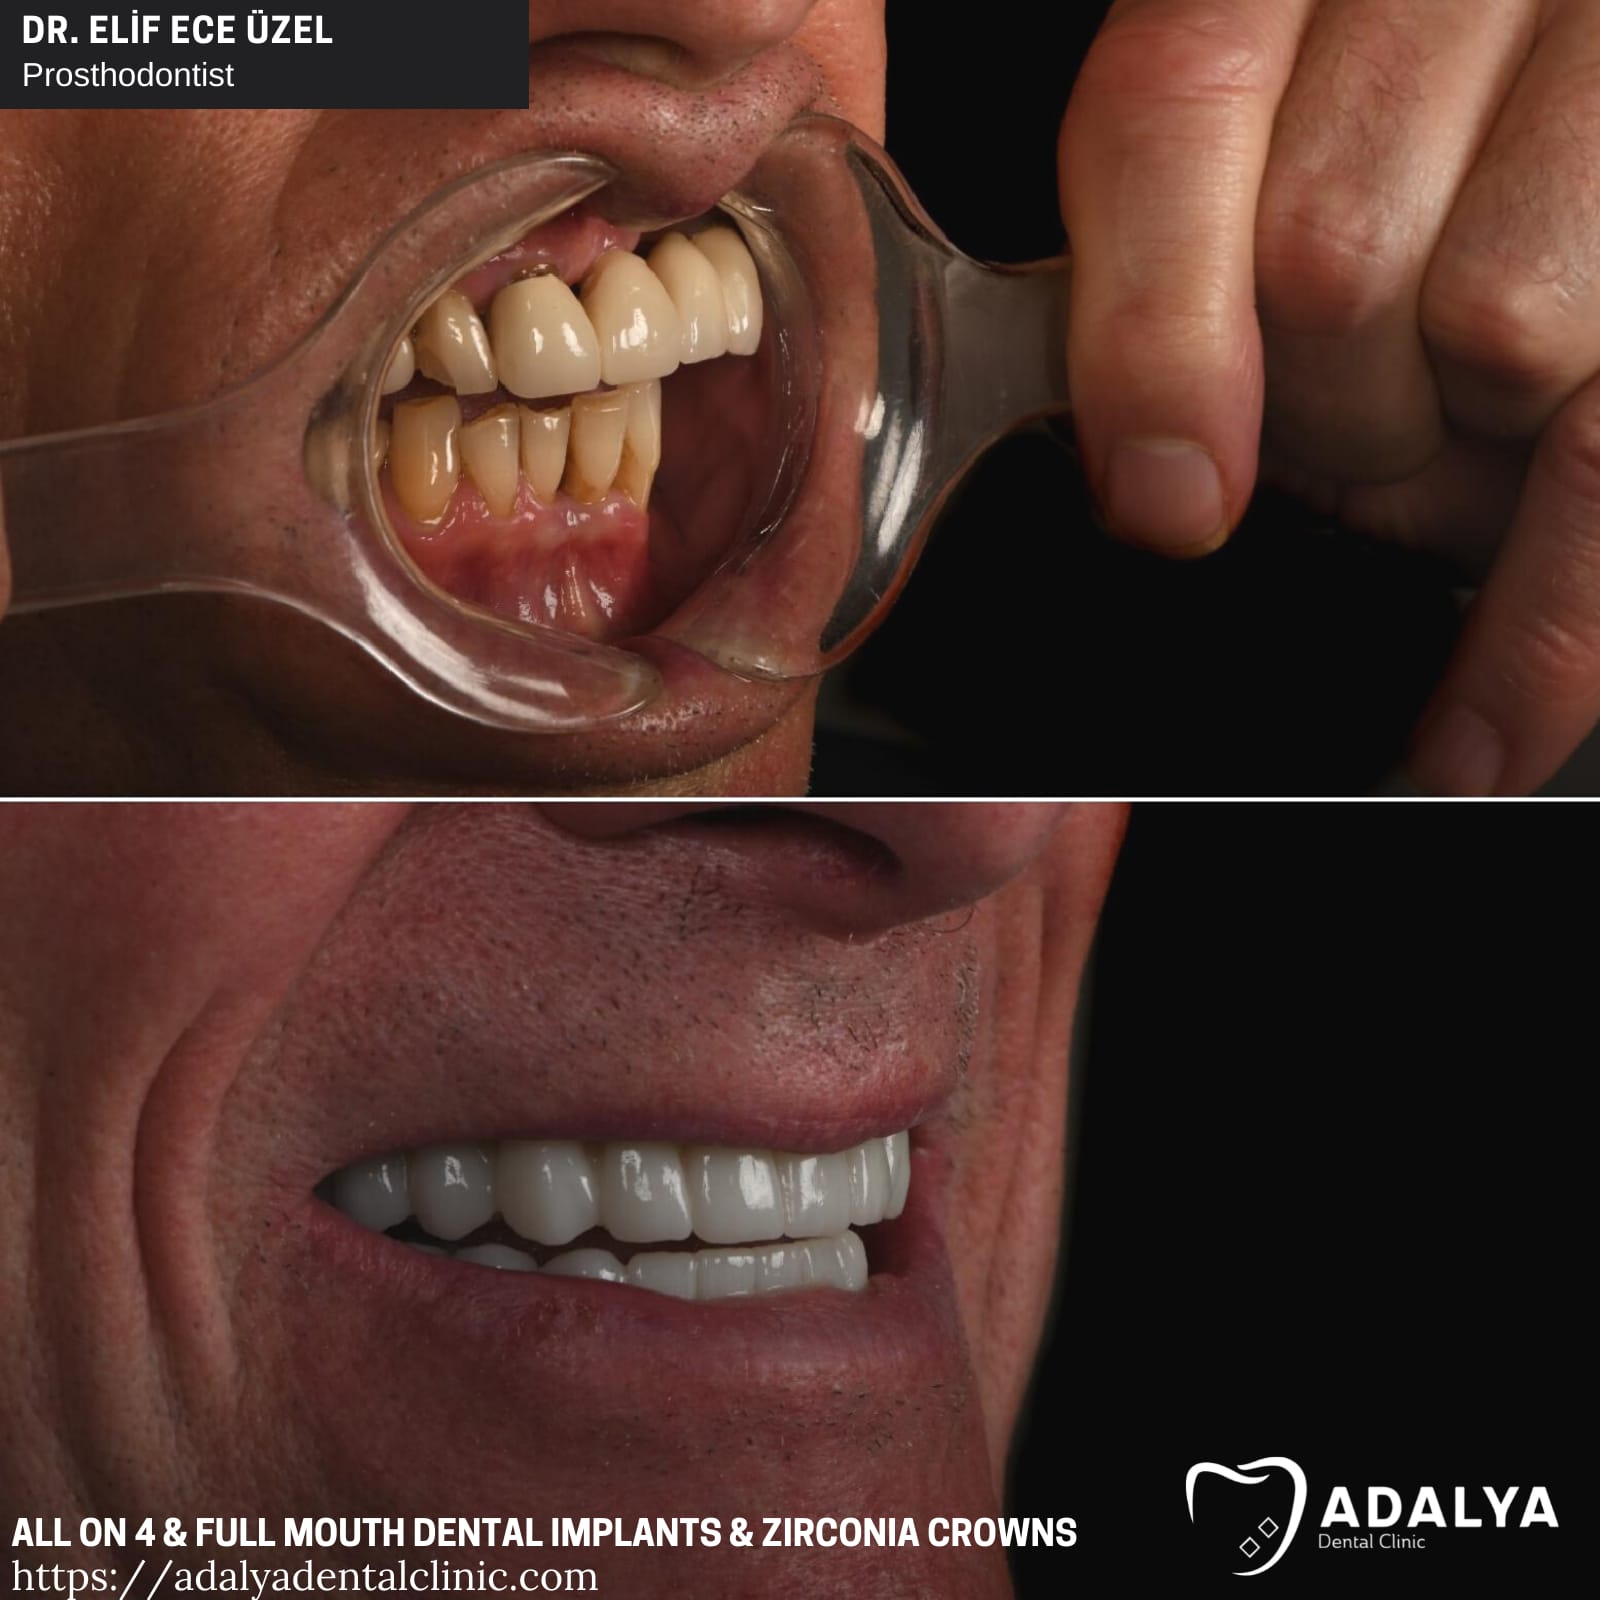 full mouth dental implants turkey package deals cost price reviews antalya tooth